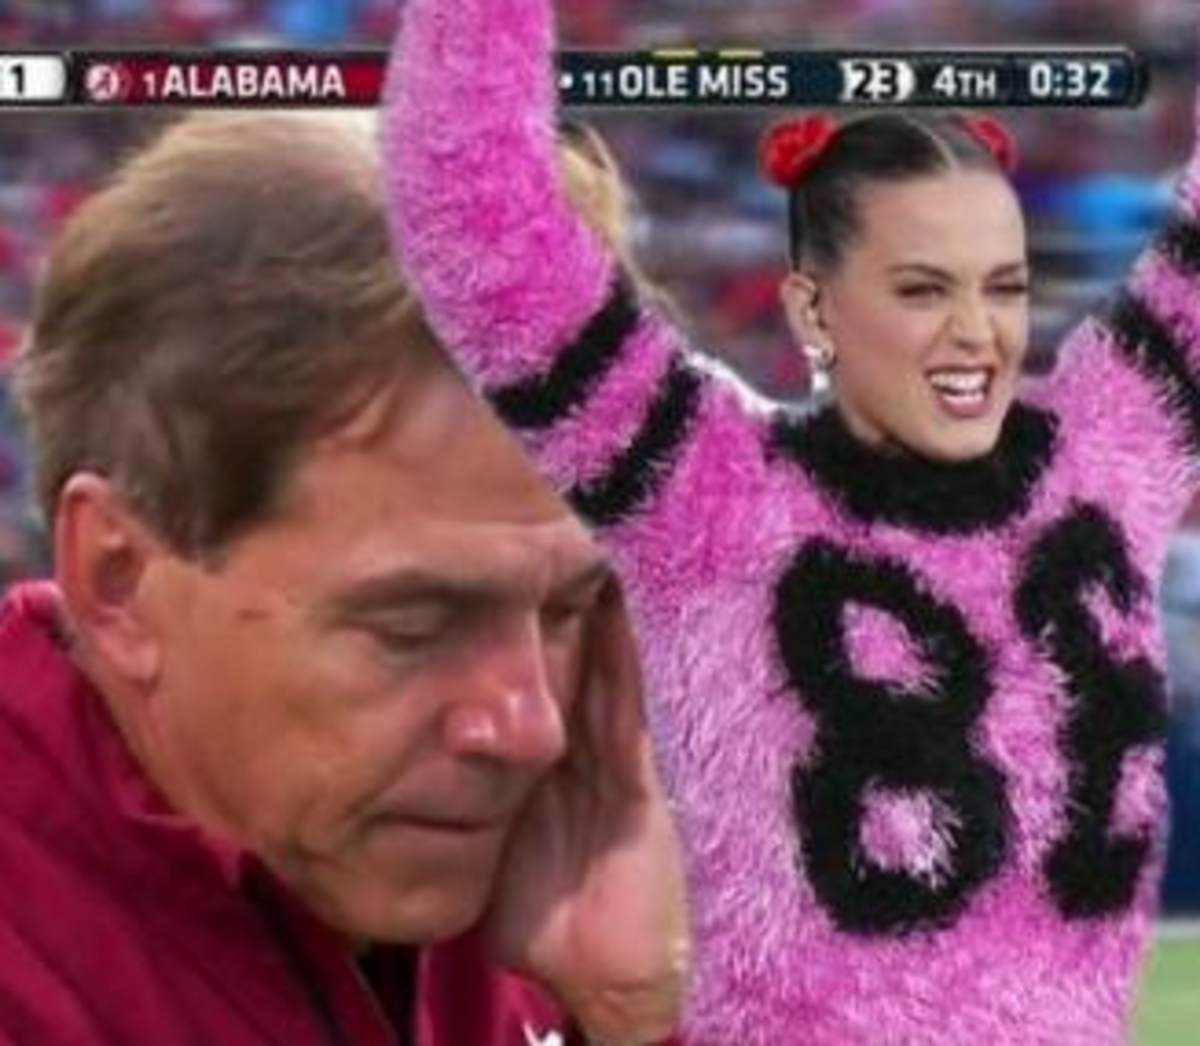 Kate Perry and Nick Saban seen as a part of Ole Miss's #hatebamaweek.